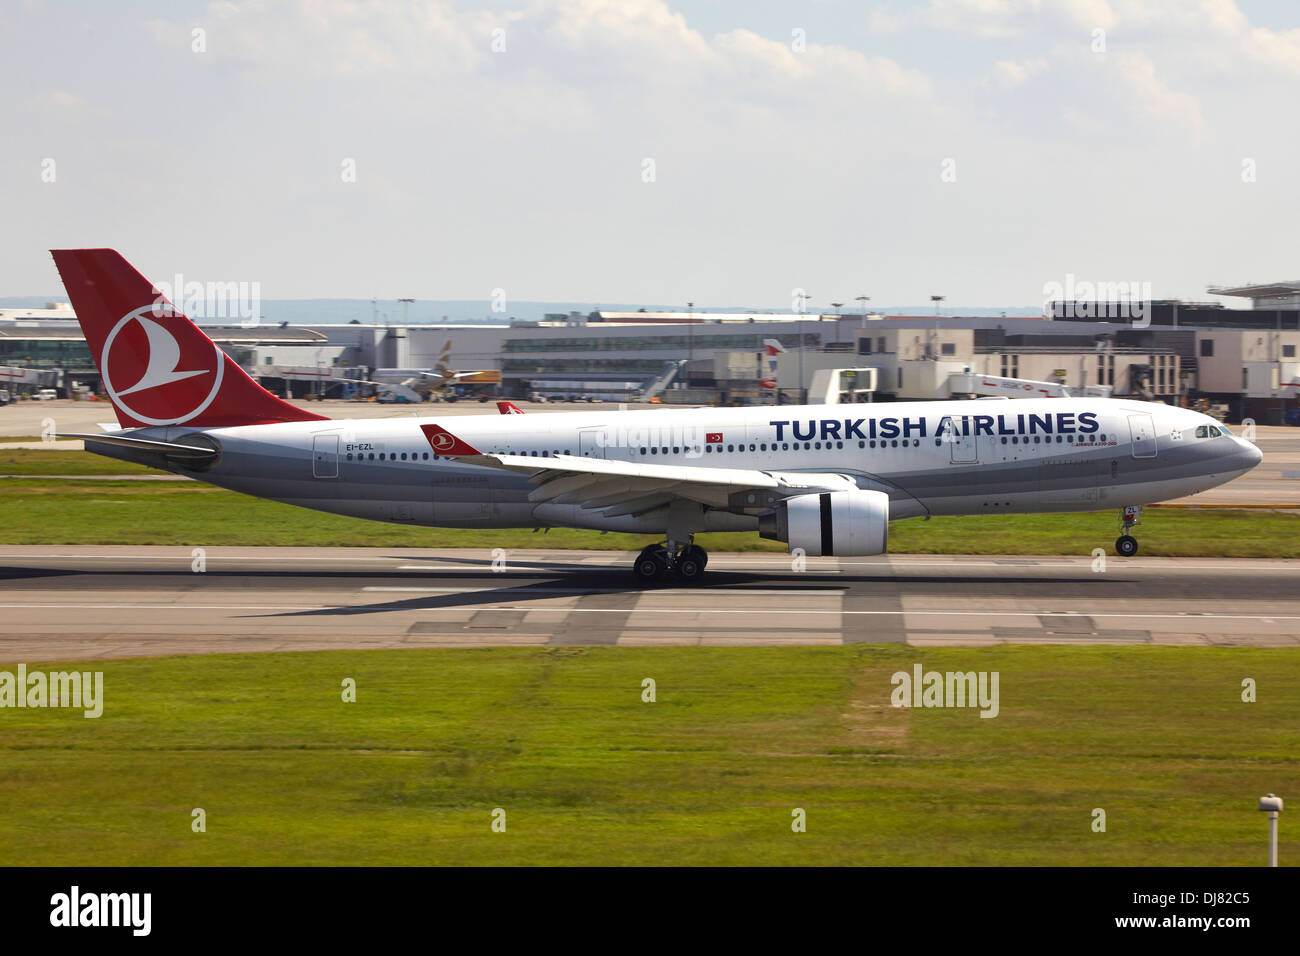 Turkish Airlines Airbus A330 landing at London Heathrow Airport Stock Photo